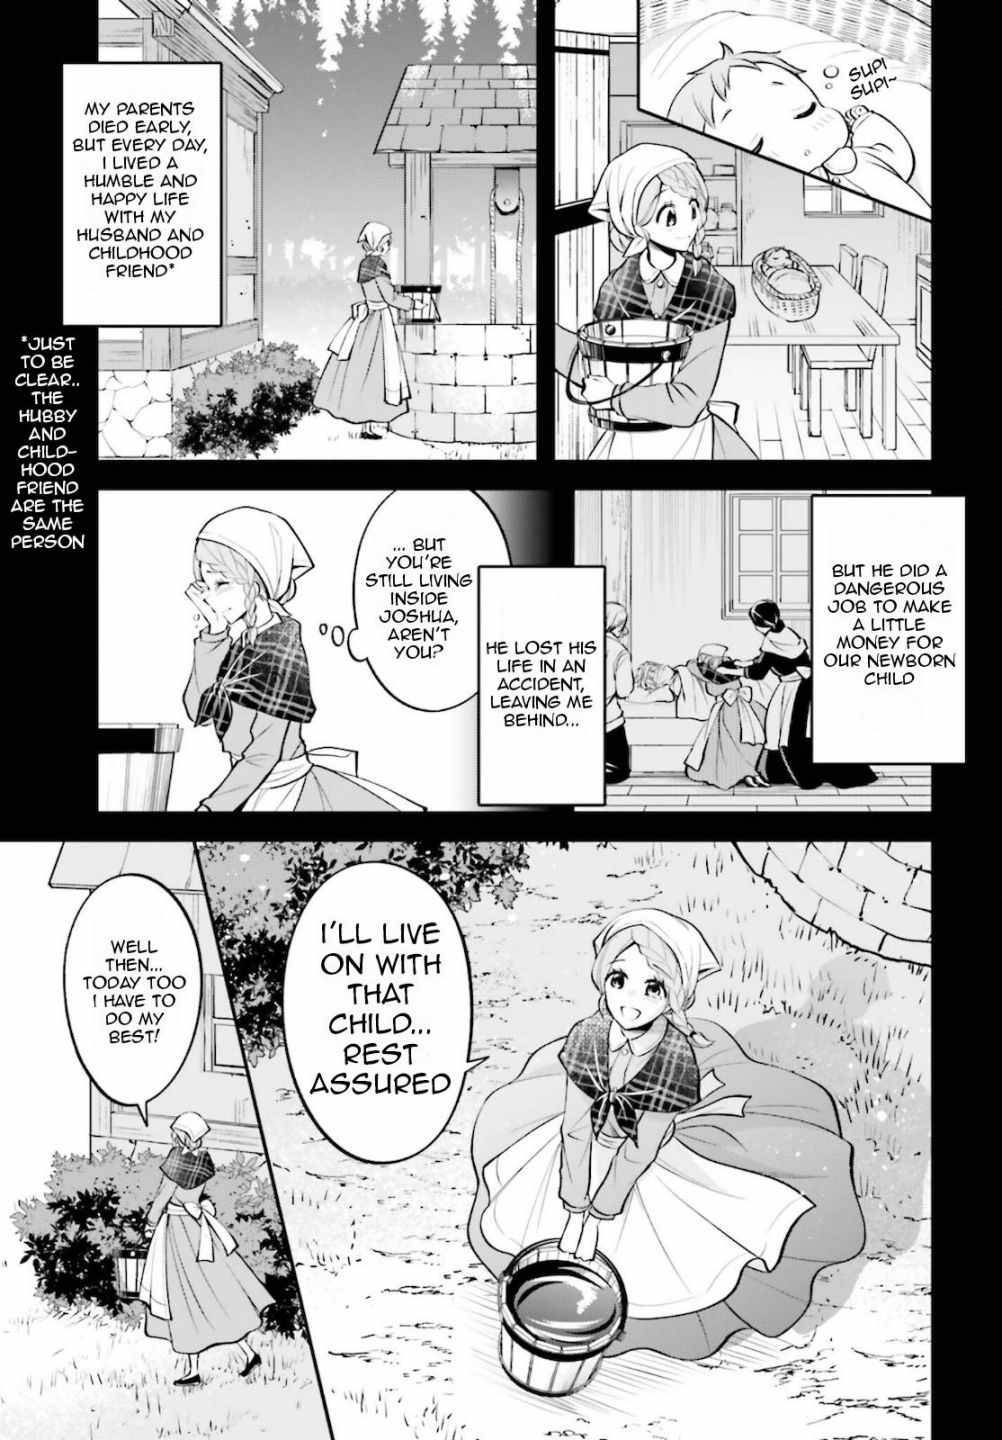 The Villainess Who Has Been Killed 108 Times - chapter 11 - #4